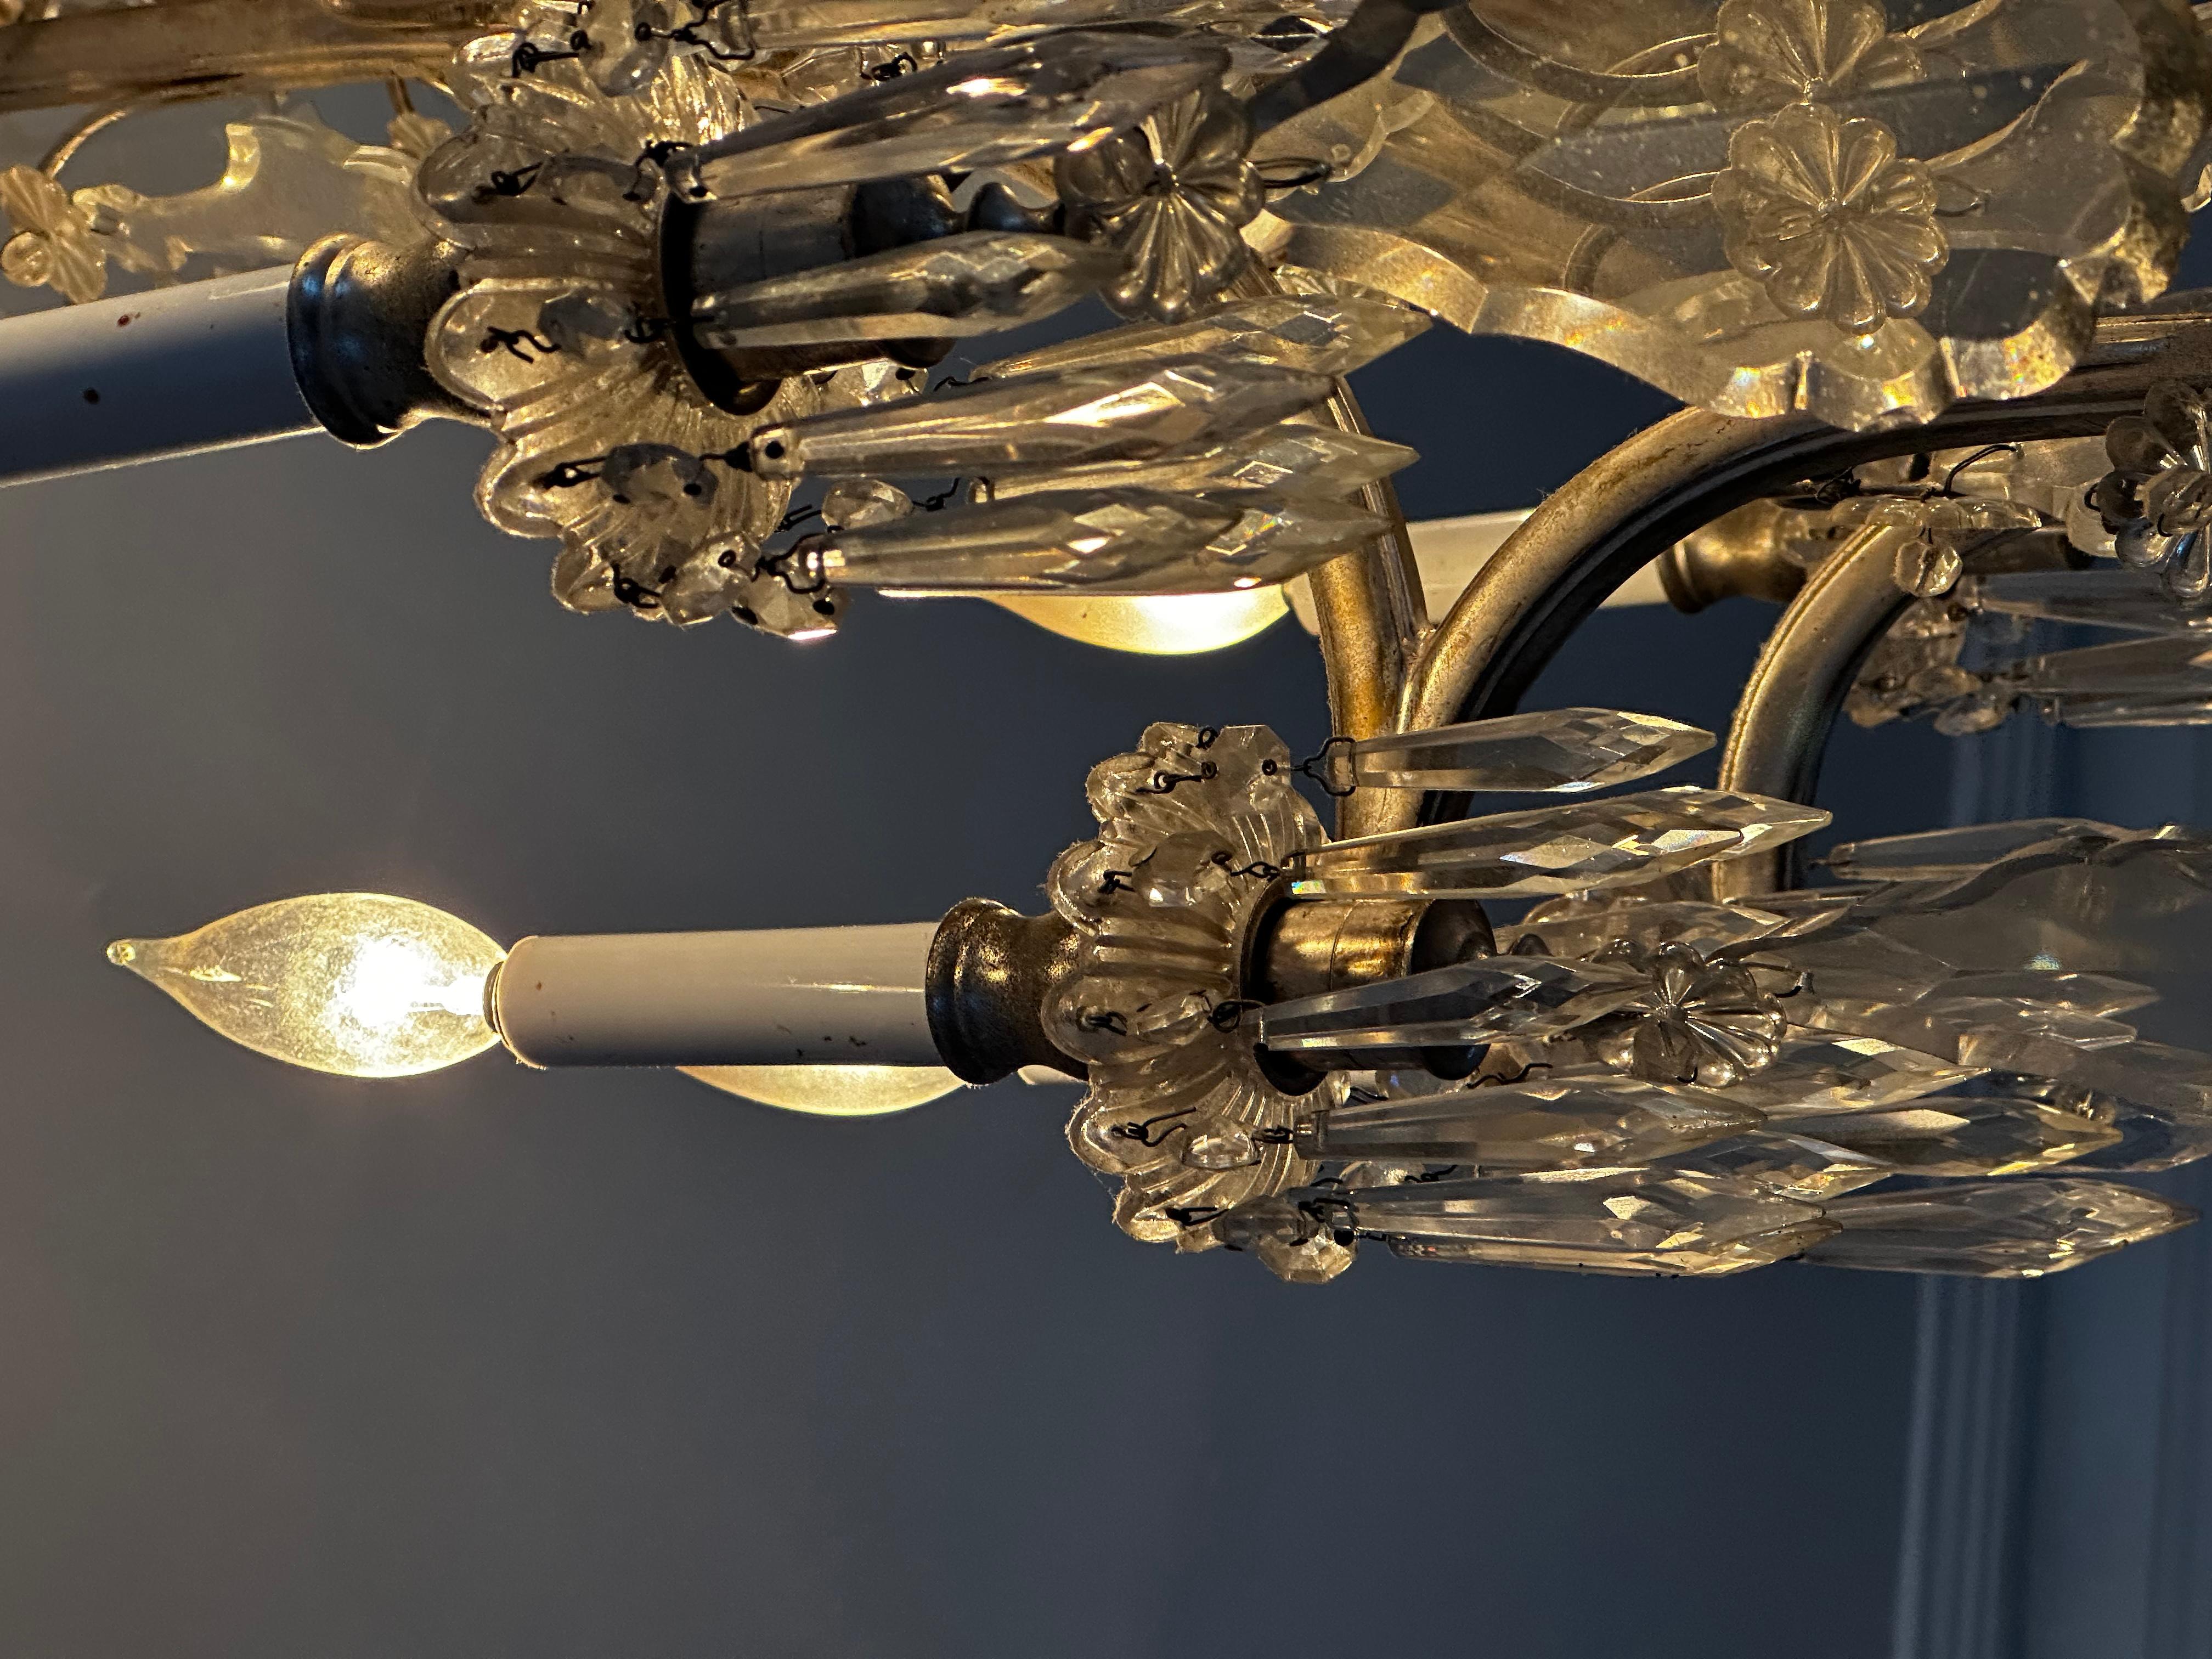 Pleased to offer this excellent 10 light crystal and silver plated vintage chandelier. It comes fresh from a Brooklyn, NY brownstone. It has four additional interior lights to enhance the overall beauty of the piece. It has been recently rewired and